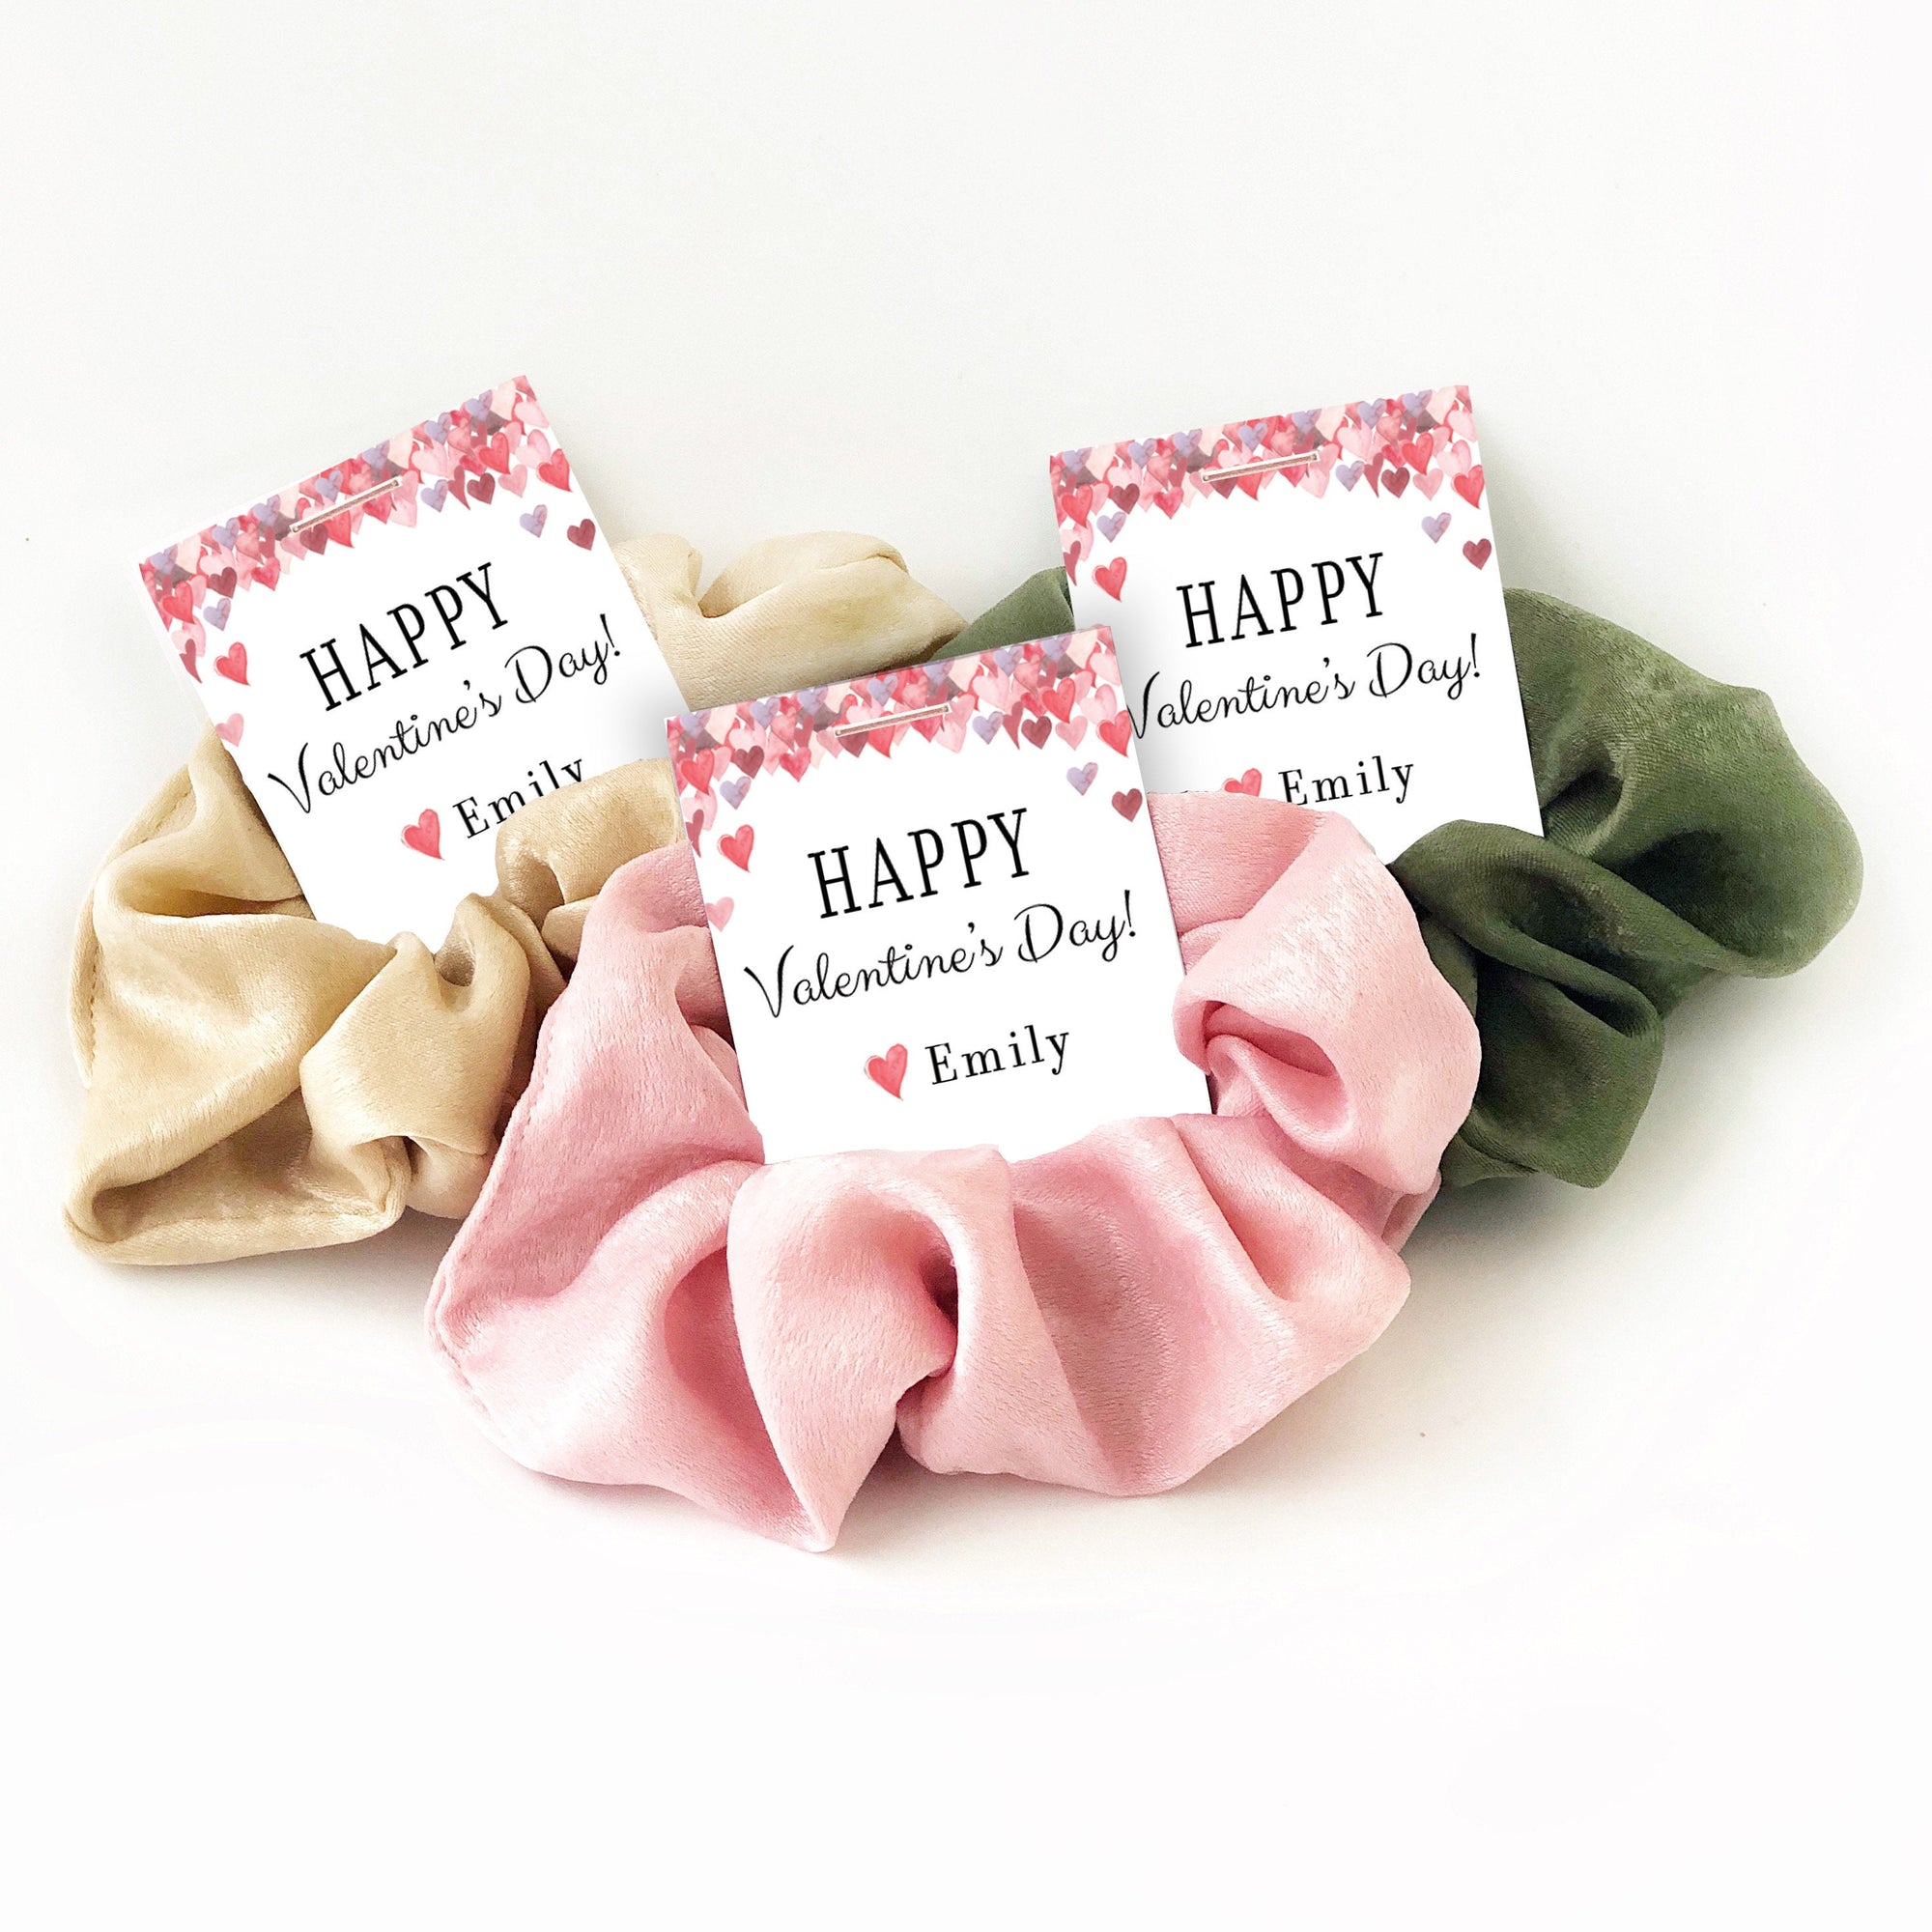 Happy Valentine's Day Party Favors, Gift for Friend, Teacher Gift